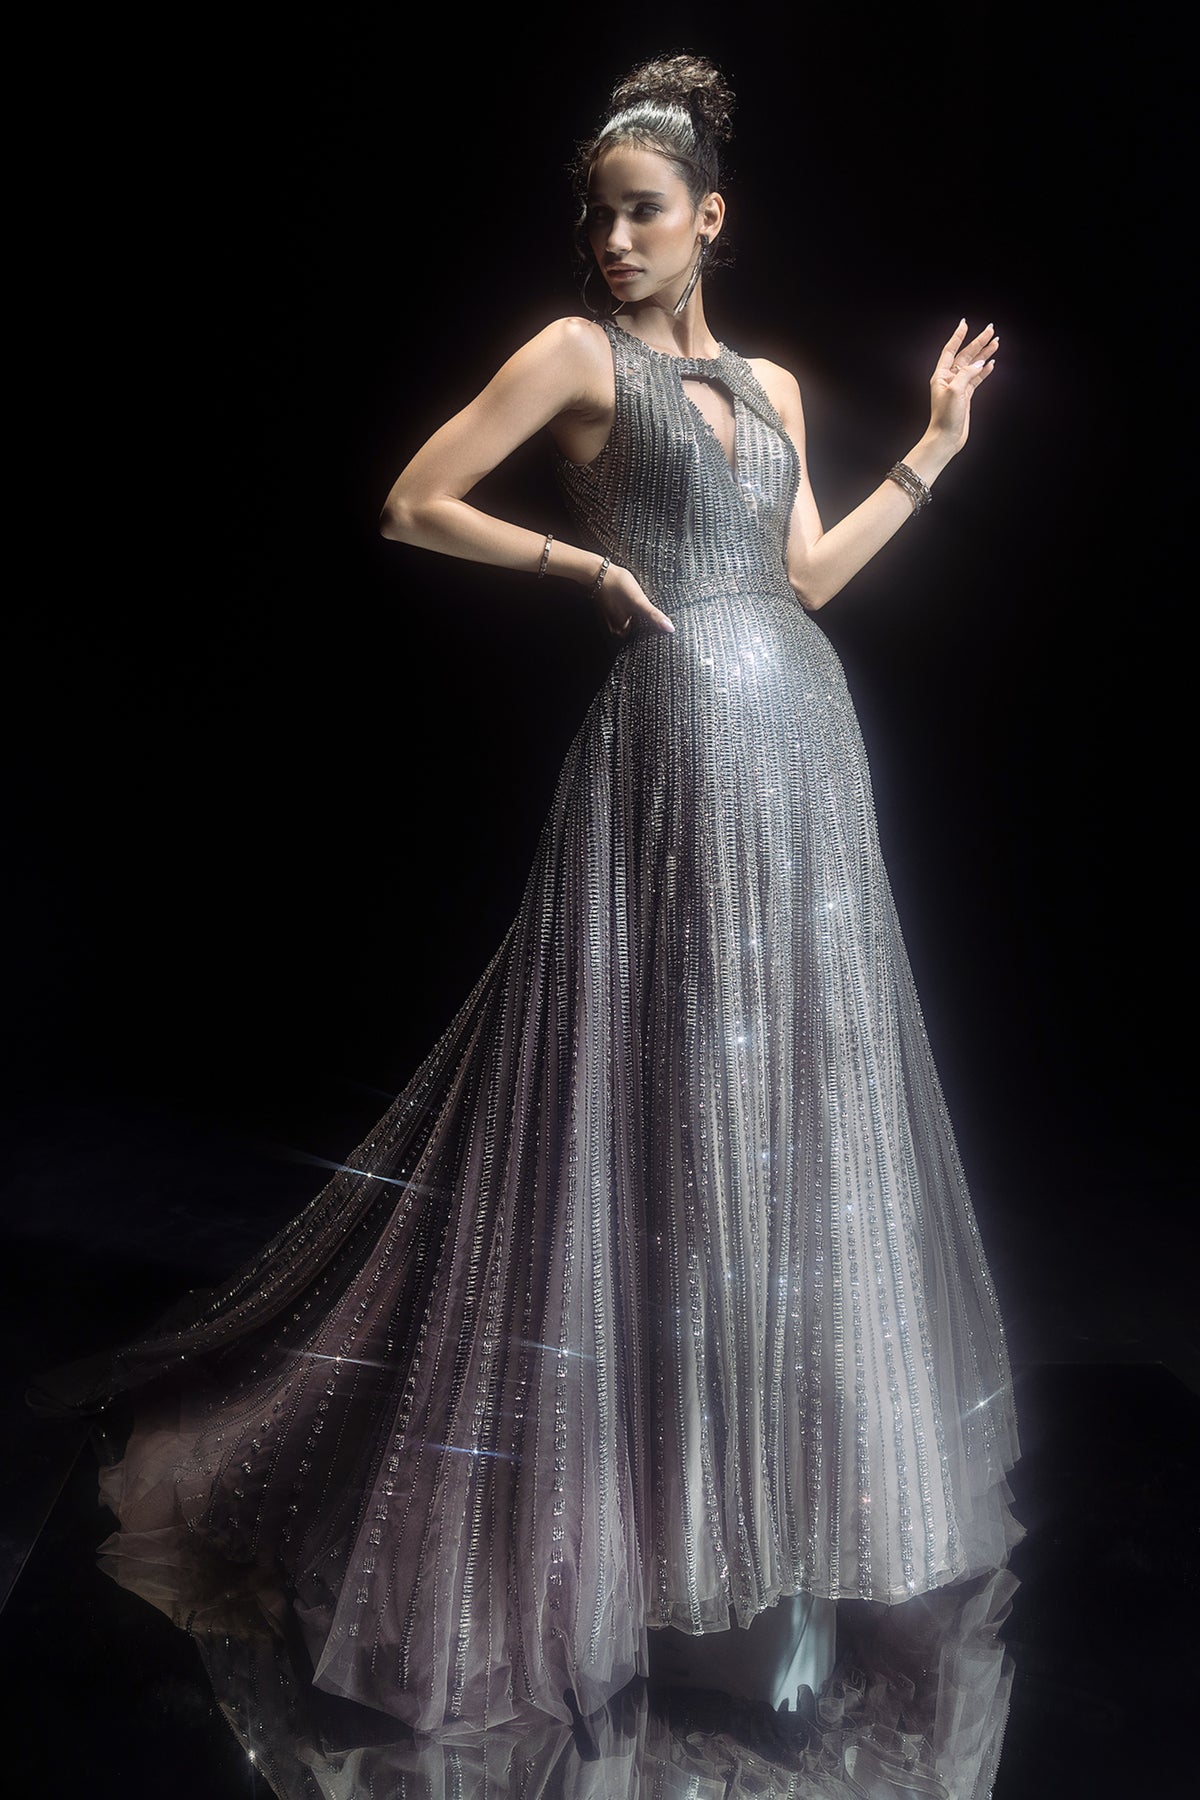 Fully Embellished crytsals And Metallic Stripes Gown